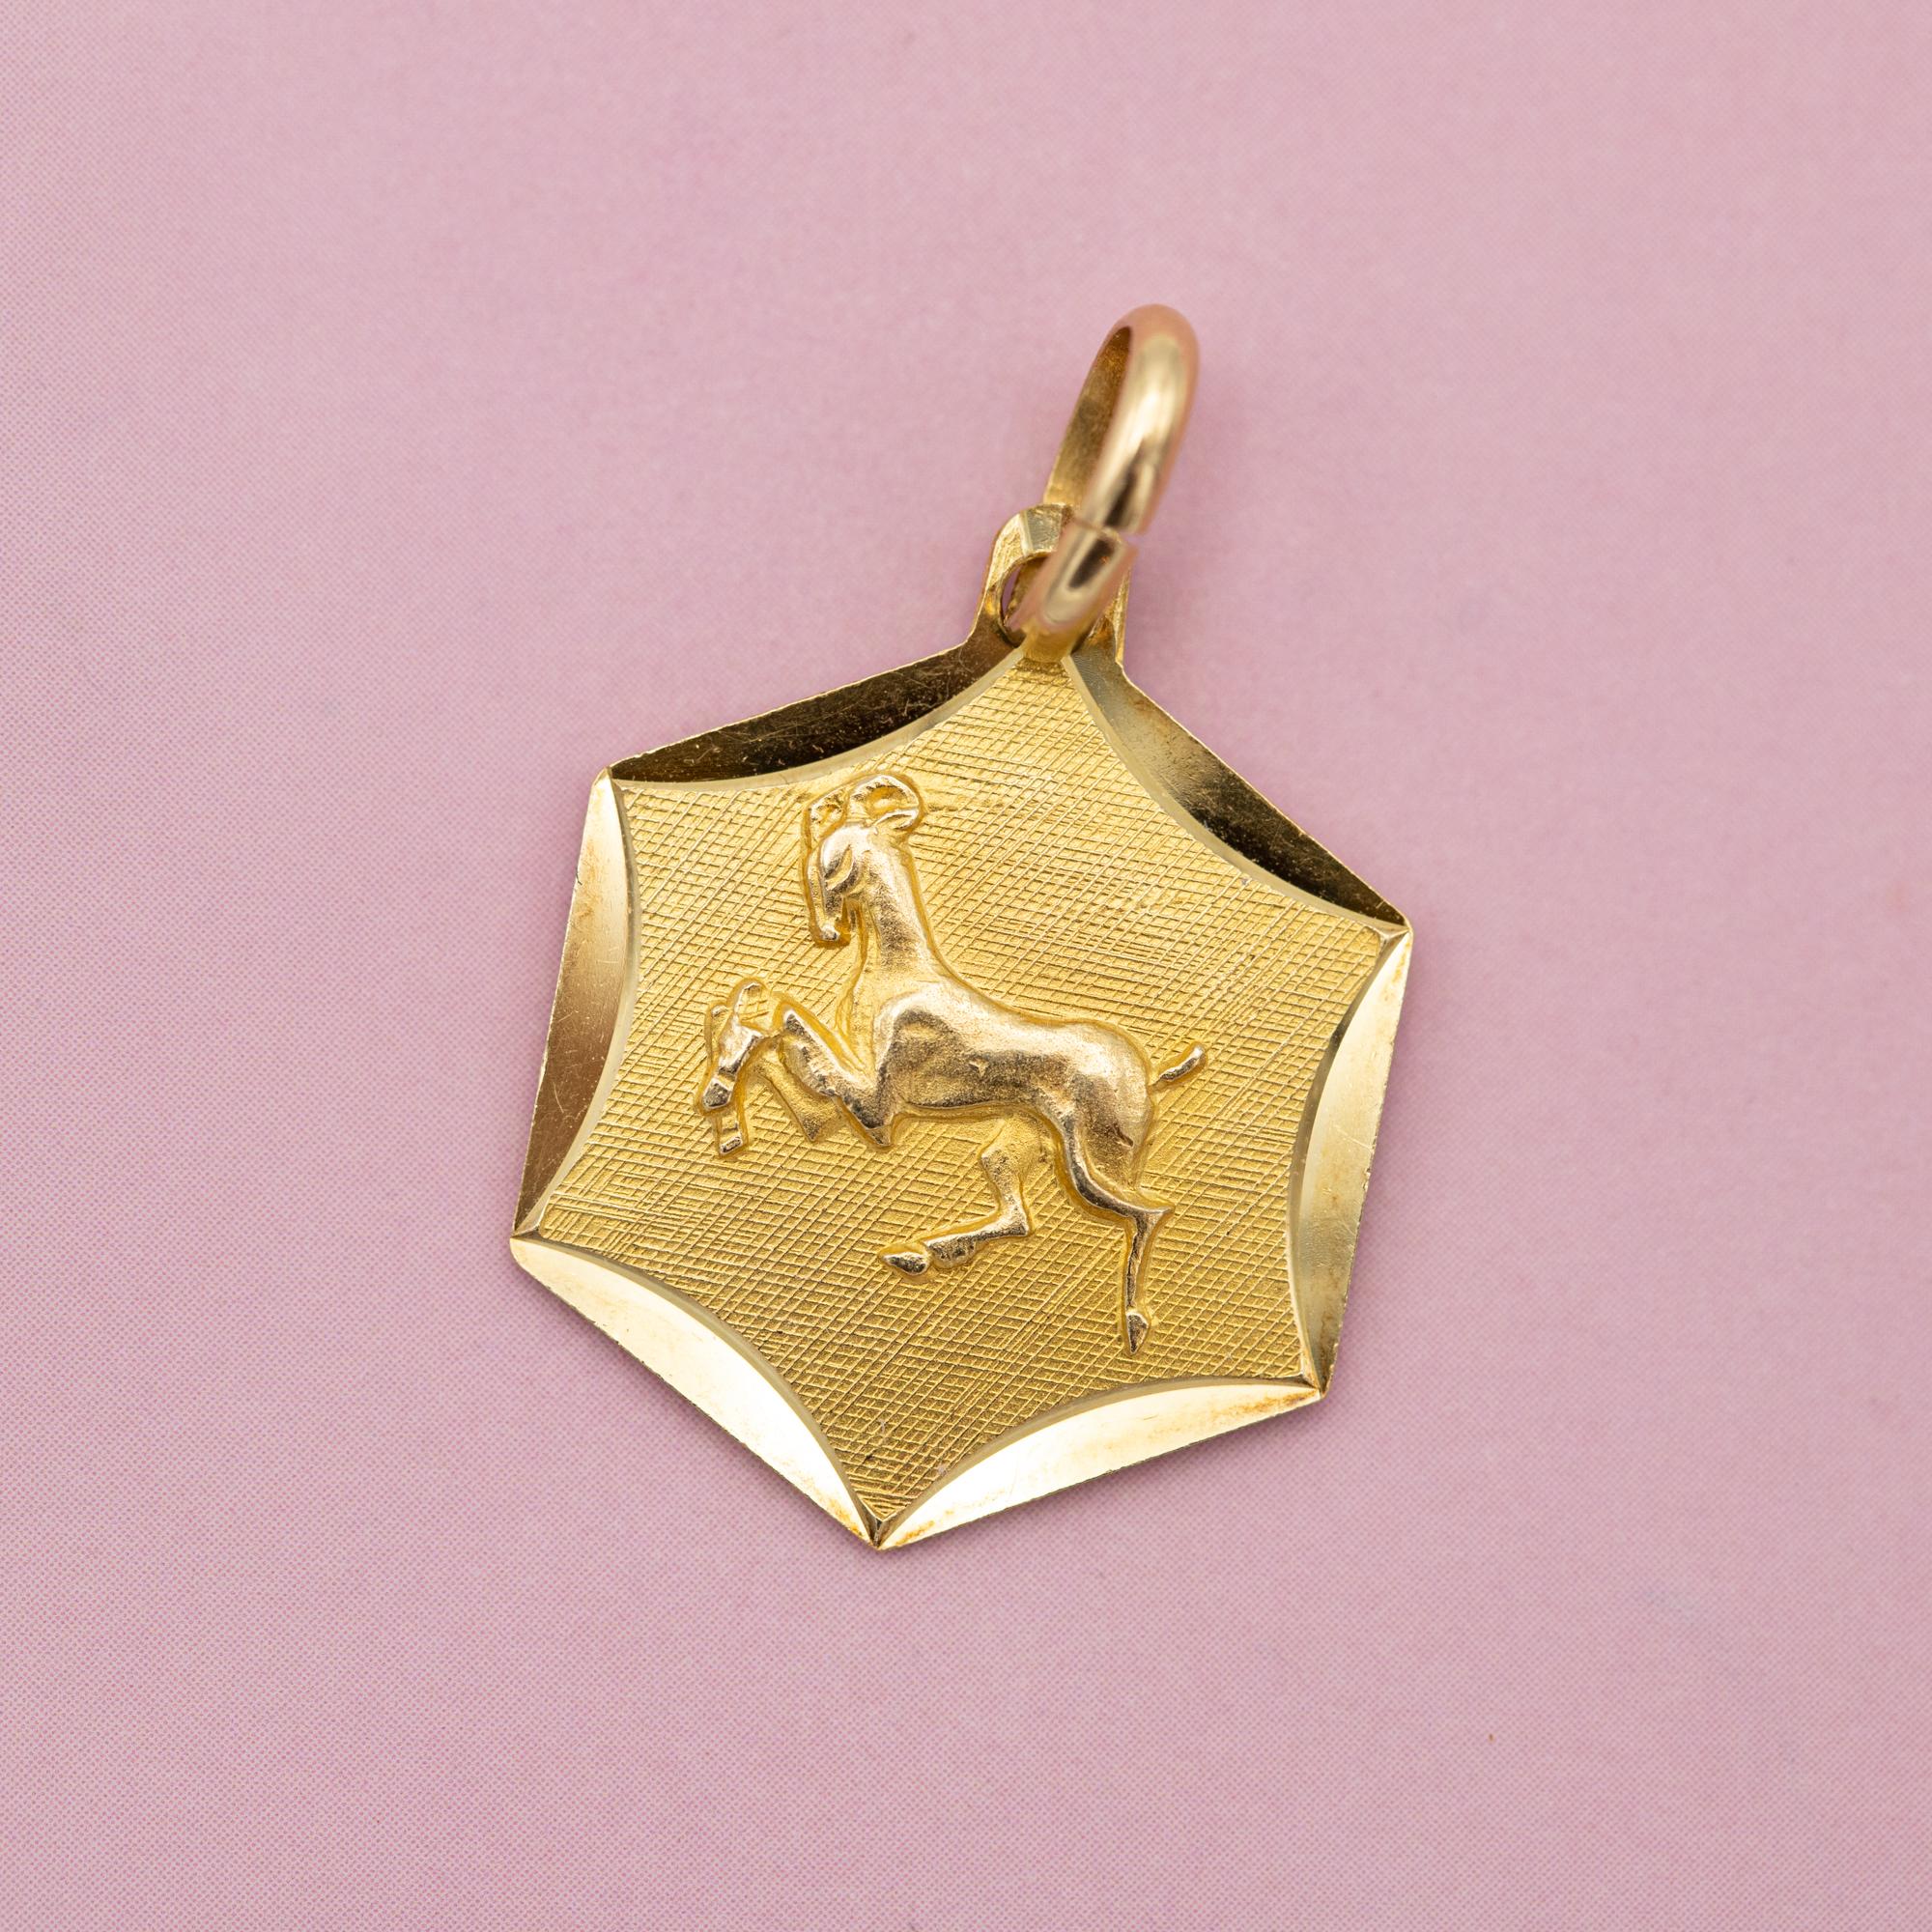 For sale is this vintage charm depicting an Aries, the first astrological sign in the zodiac. This Constellation Star Sign Pendant is associated with the birth dates between 21 March and 20 April. This pretty charm is marked with a 750 mark, an